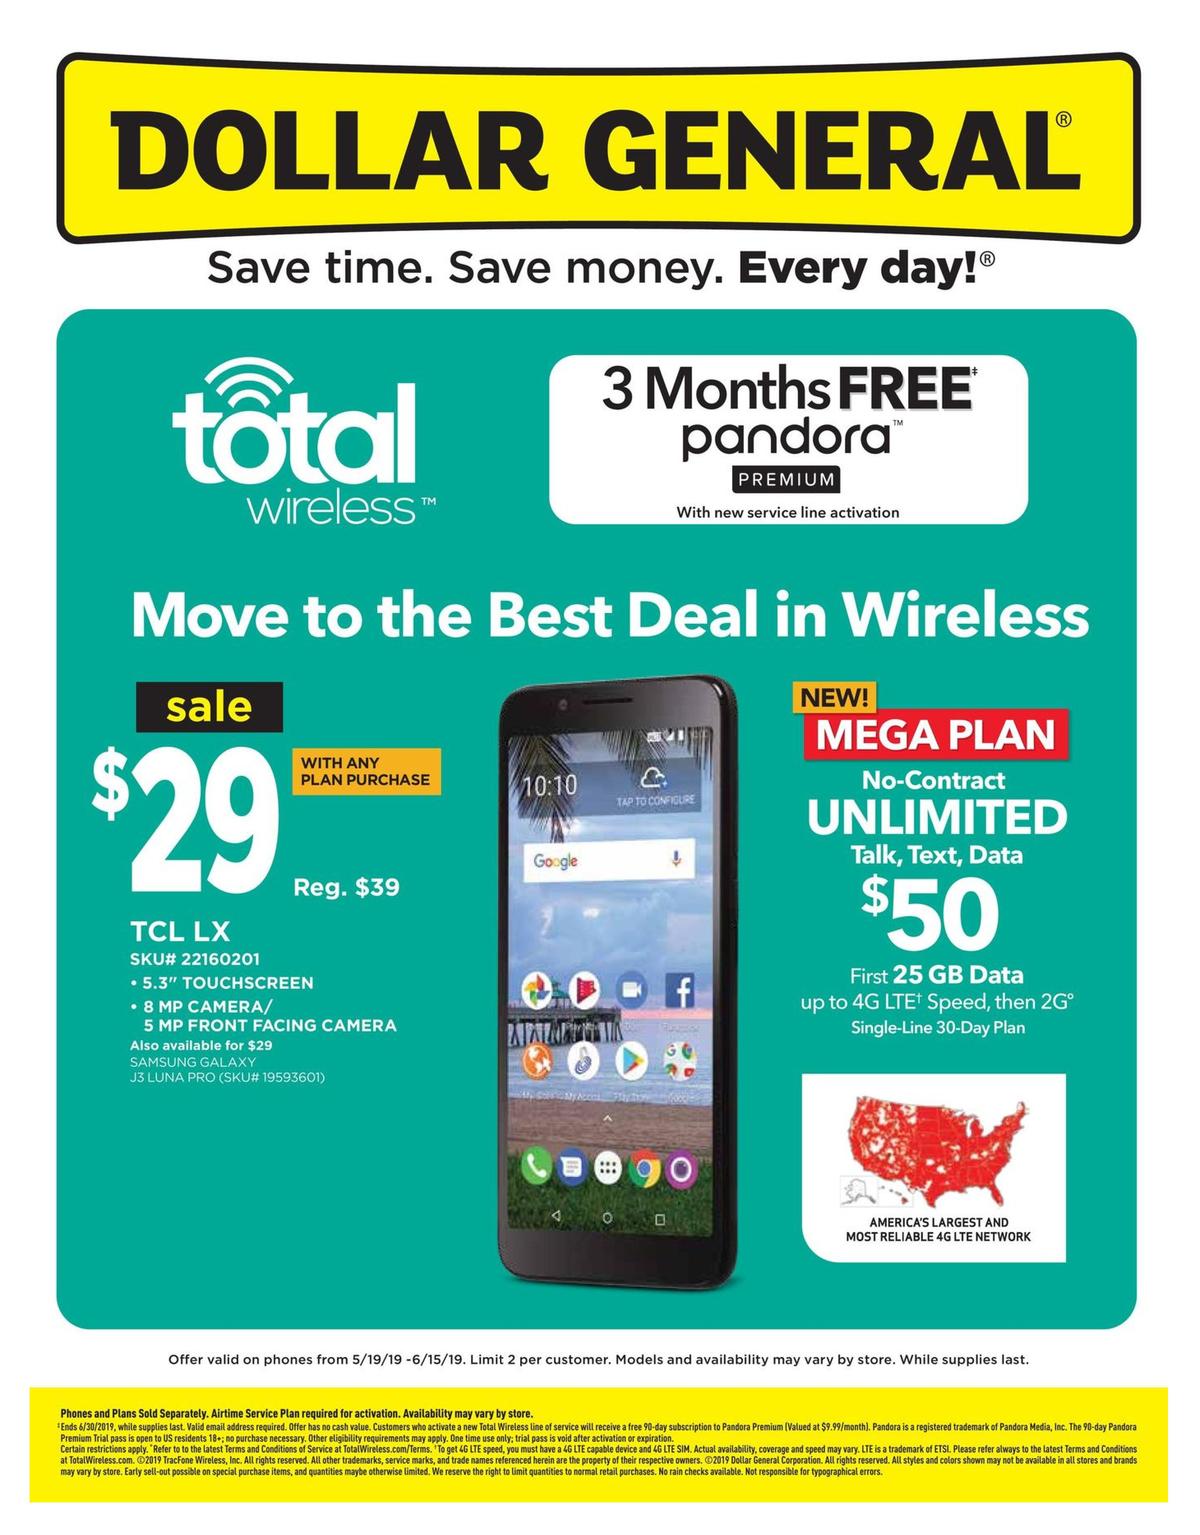 Dollar General Weekly Wireless Specials Weekly Ad from May 19